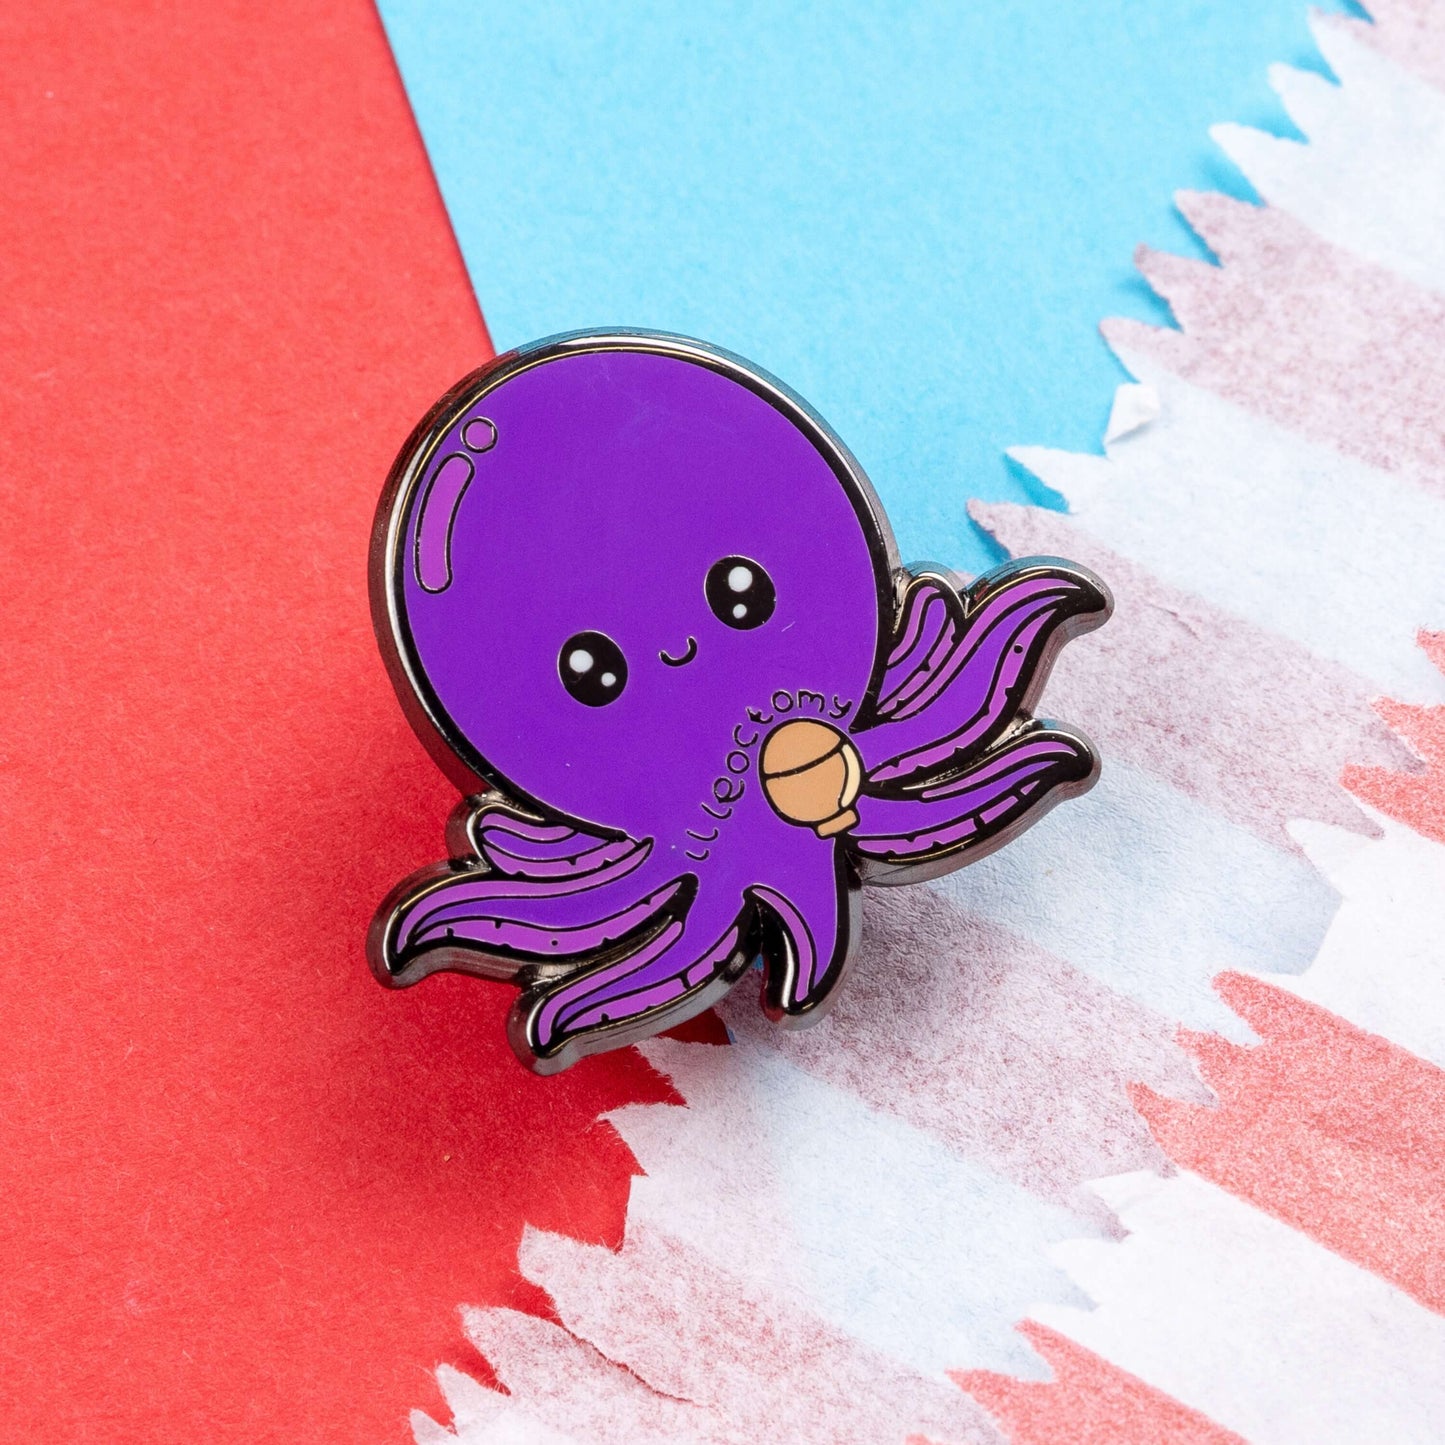 Ileoctomy Enamel Pin - Ileostomy on a blue and red card background. The enamel pin is a cute smiling purple octopus sticker with text saying ileoctomy on its belly with a stoma bag underneath. Enamel pin designed to raise awareness for Ileostomy.